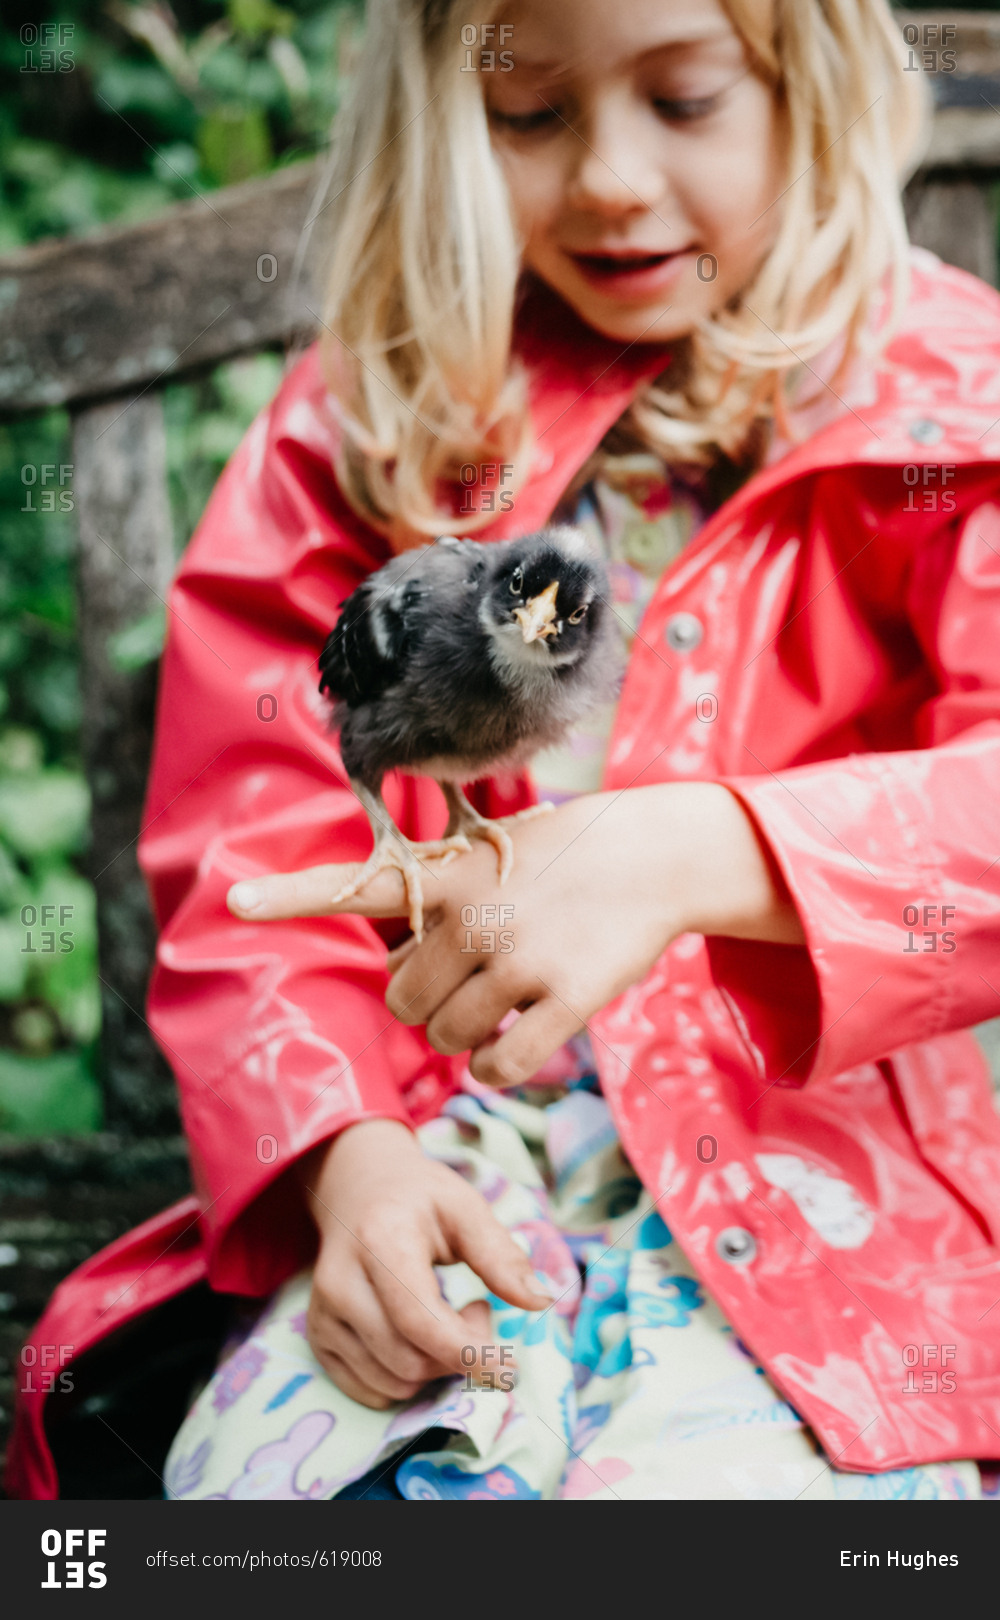 Girl with a baby chick on her finger